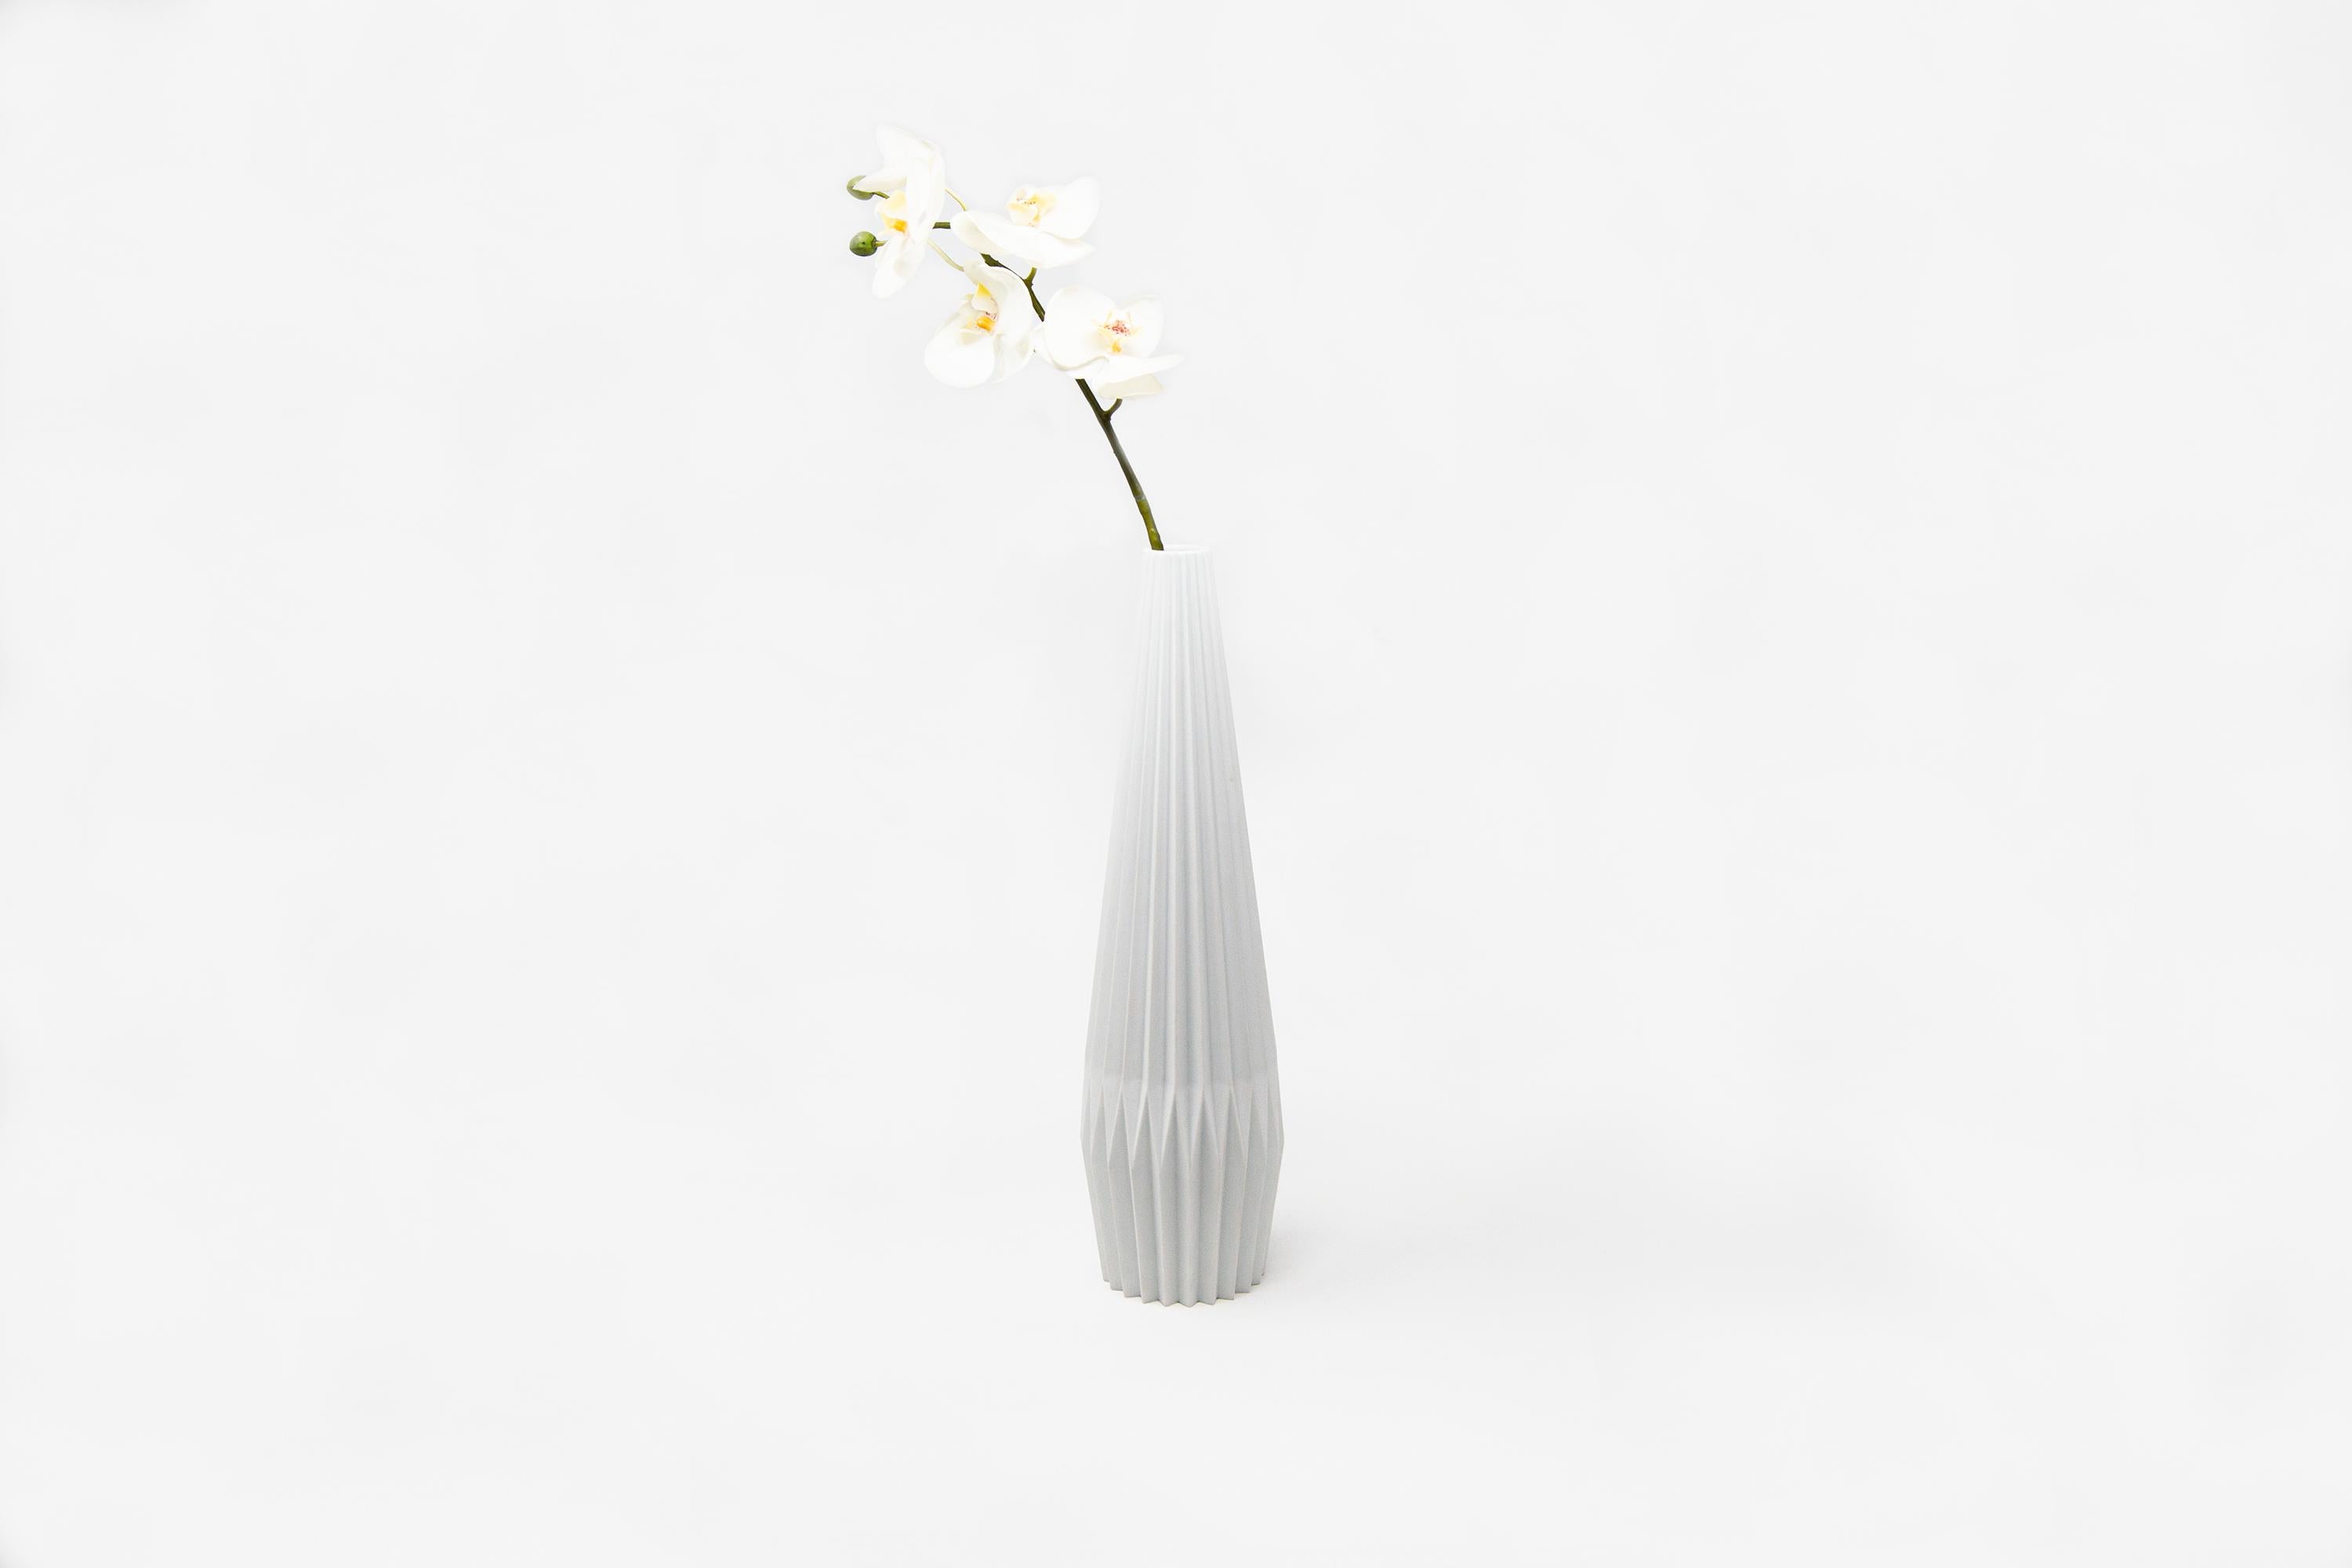 This vase is designed by Denis Guidone and handmade in Japan by Risogama for Hands on Design, a traditional pottery. It reminds the Japanese tradition of Origami, the designer uses the white Arita porcelain like paper and lighten the appearance of